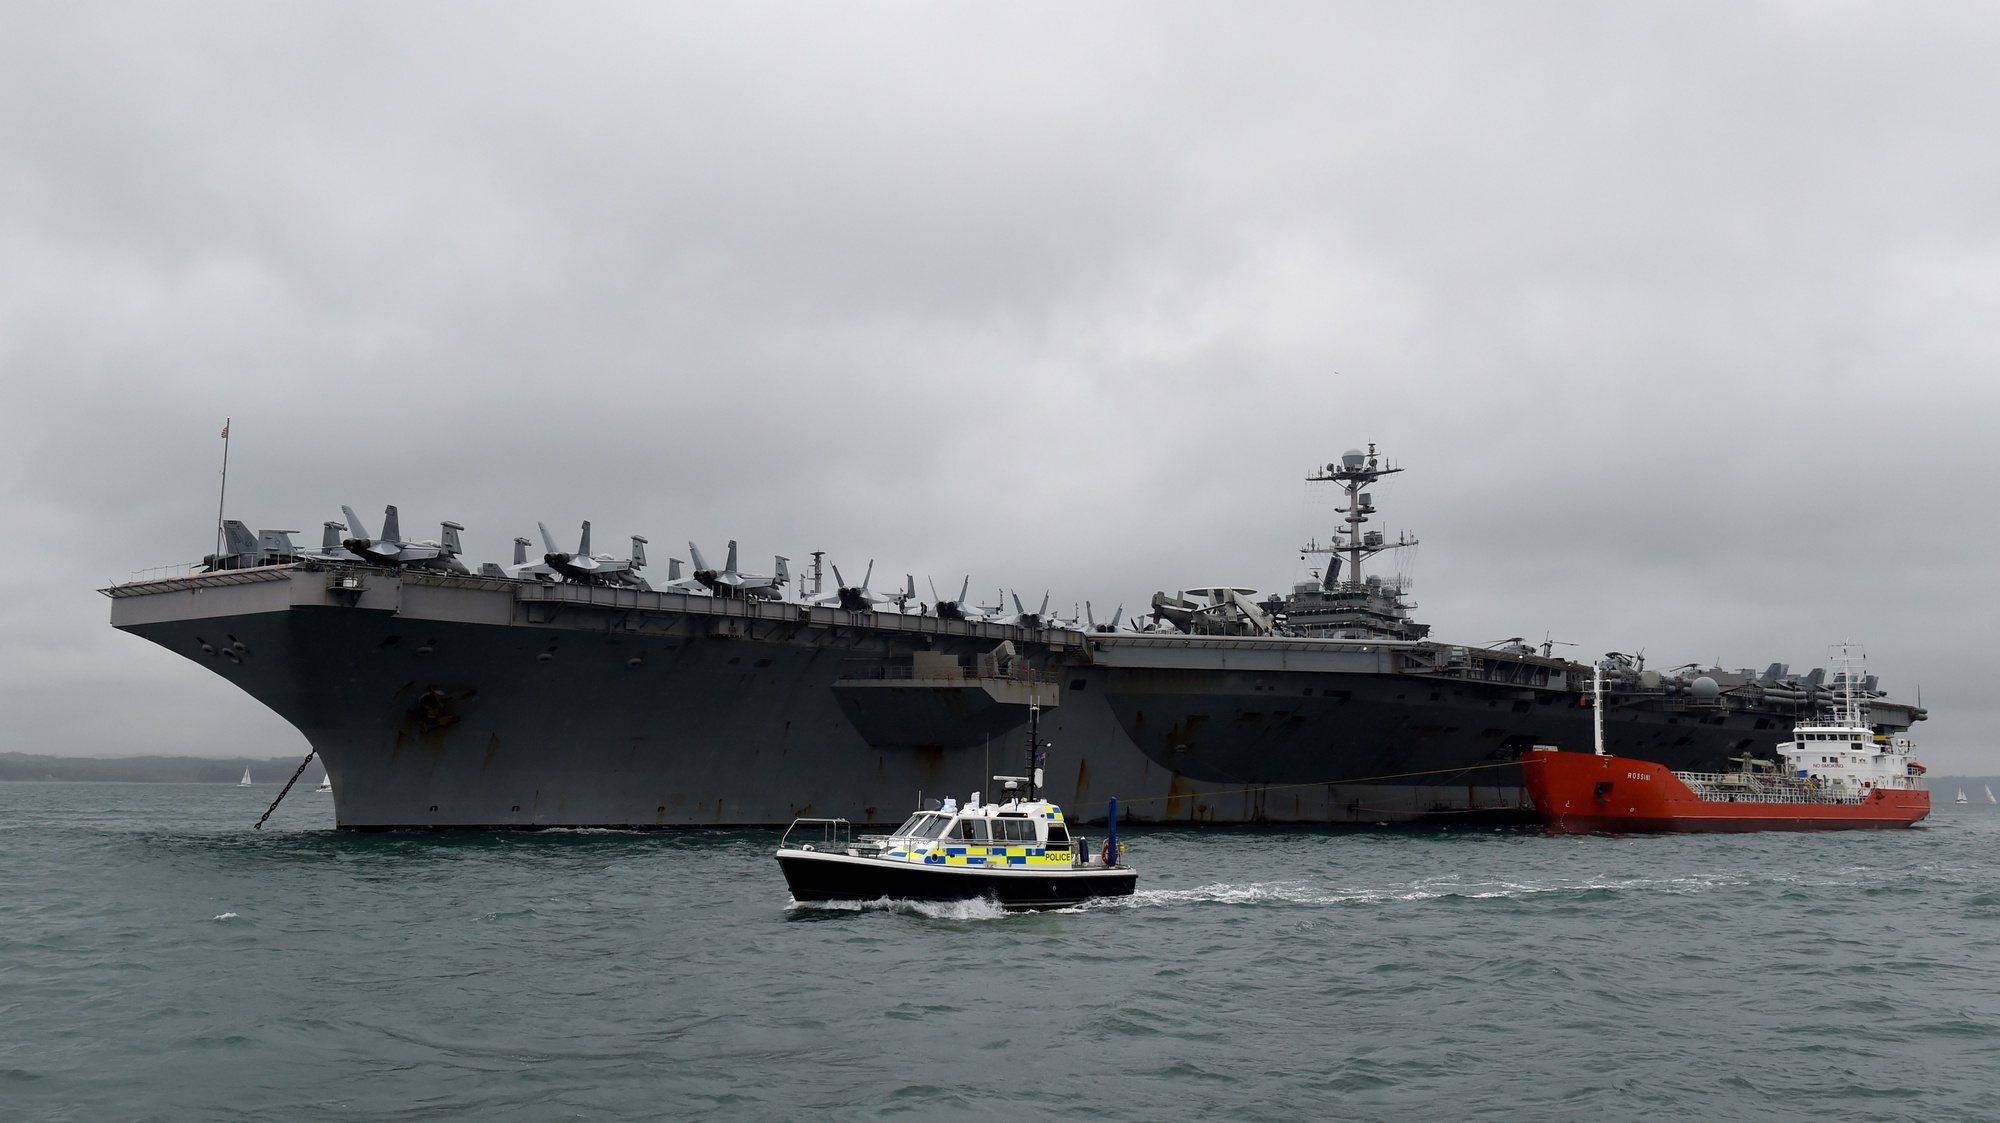 epa07074150 A general view of USS Harry S. Truman Navy in Portsmouth Britain, 06 October 2018. The USS Harry S. Truman is named after the 33rd President of the United States and is the ninth nuclear powered aircraft carrier. The ship is 1.096 feet long, 20 stories high form the waterline and and has area of flying deck of 4.5 acres. Harry S. Truman can reach a top speed of 30+ knots and has a crew of 5,000 plus.  EPA/FACUNDO ARRIZABALAGA